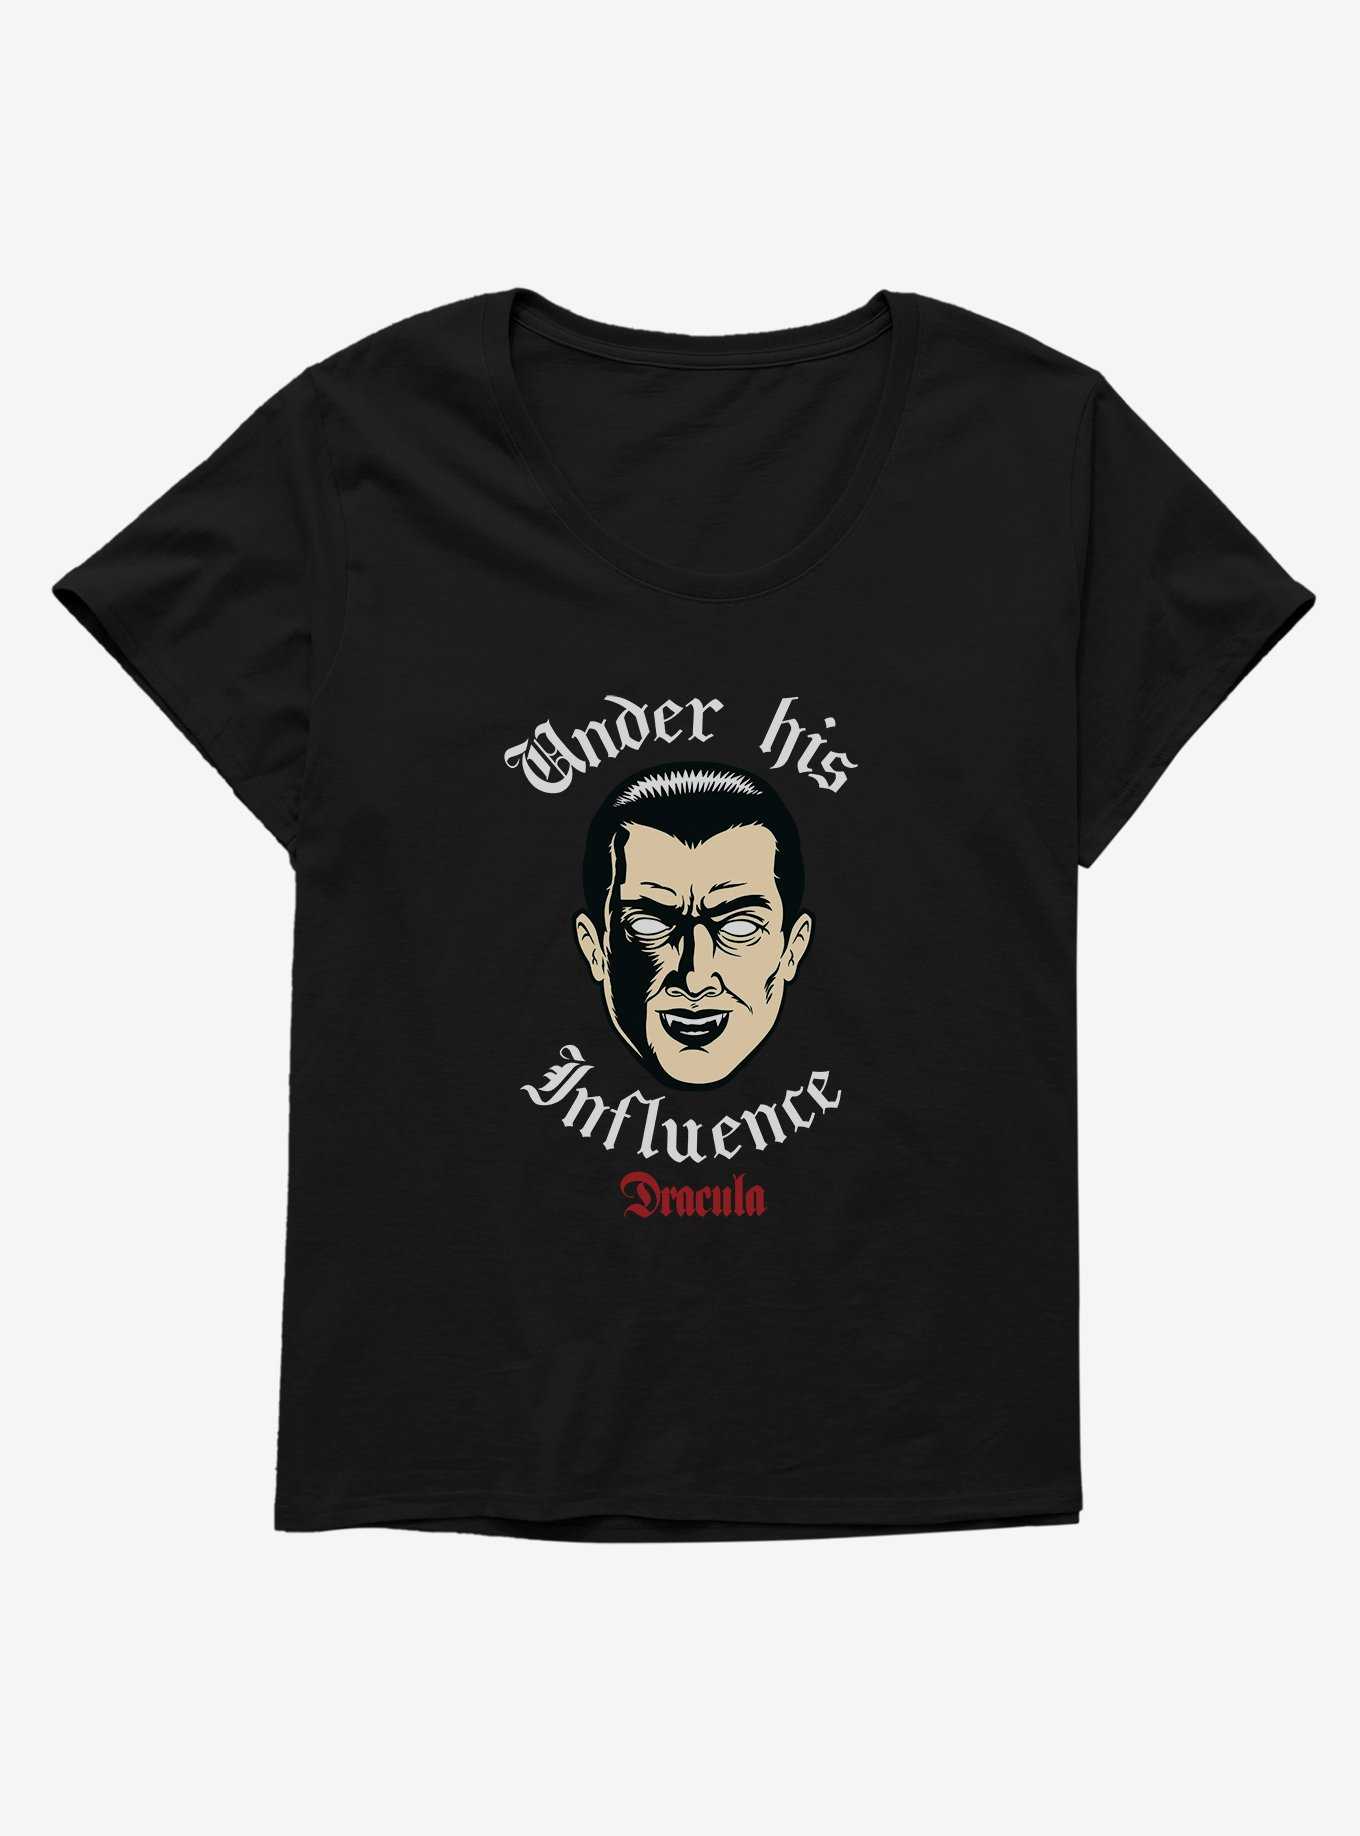 Universal Monsters Dracula Under His Influence Girls T-Shirt Plus Size, , hi-res